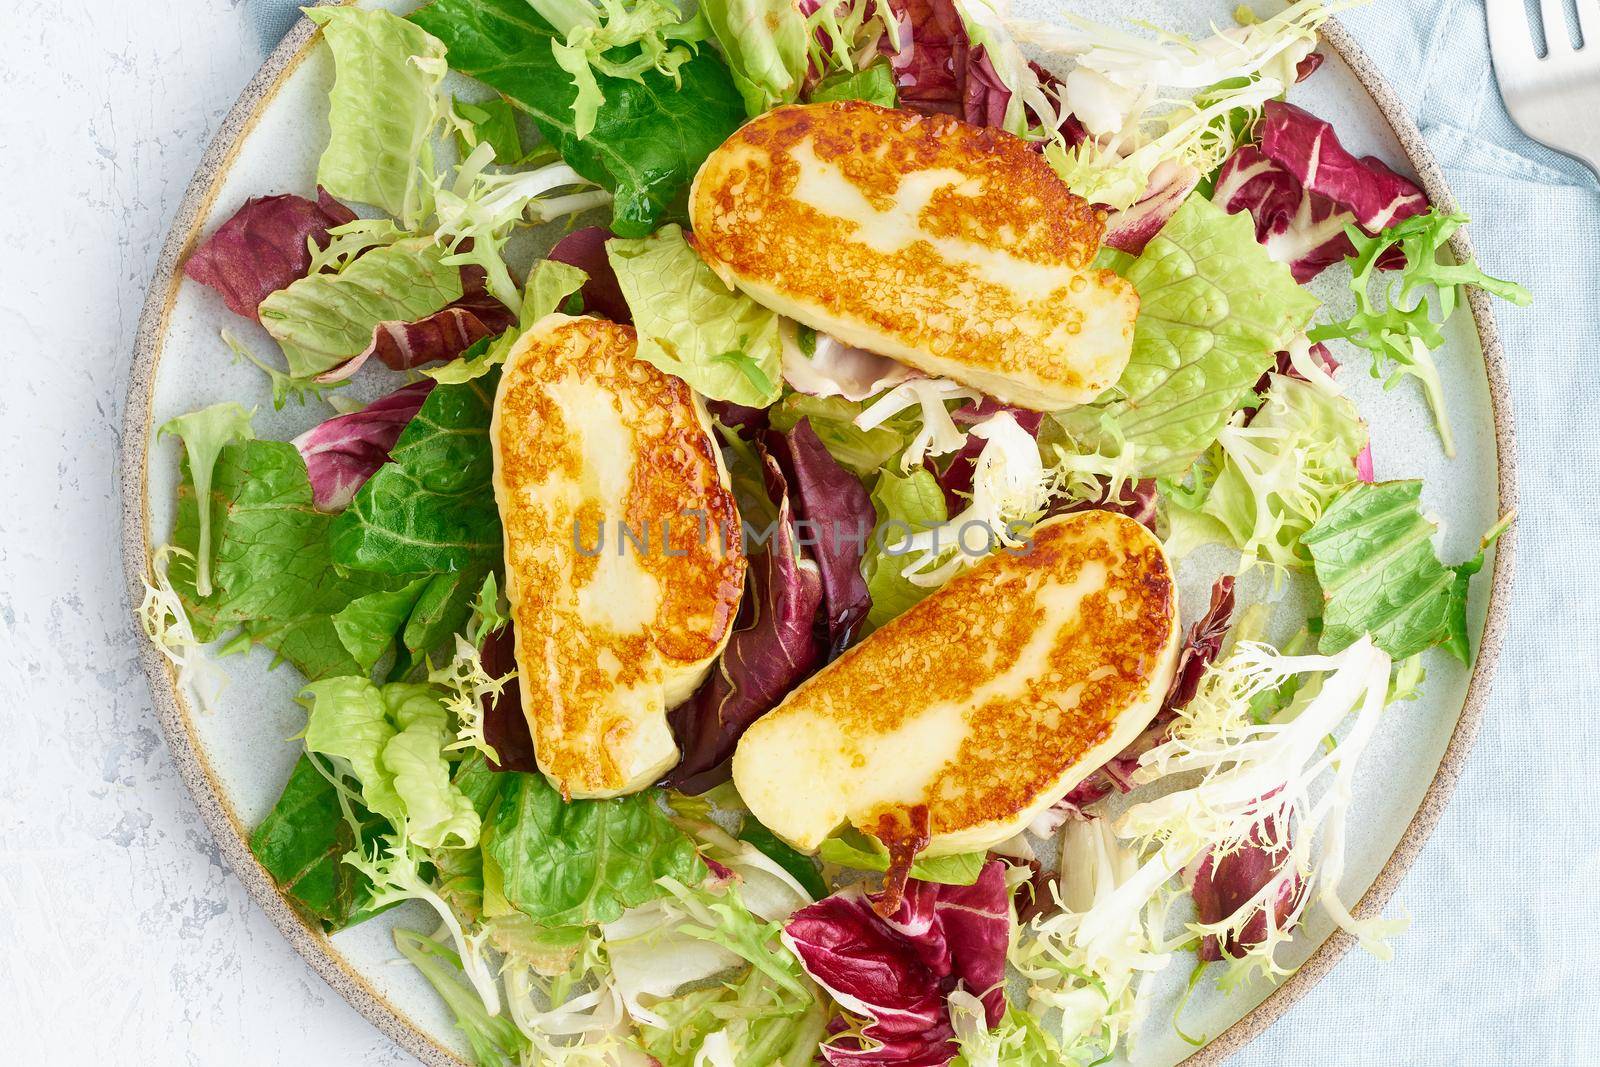 Close up cyprus fried halloumi with healthy salad mix. Lchf, pegan, fodmap, paleo, scd, keto by NataBene